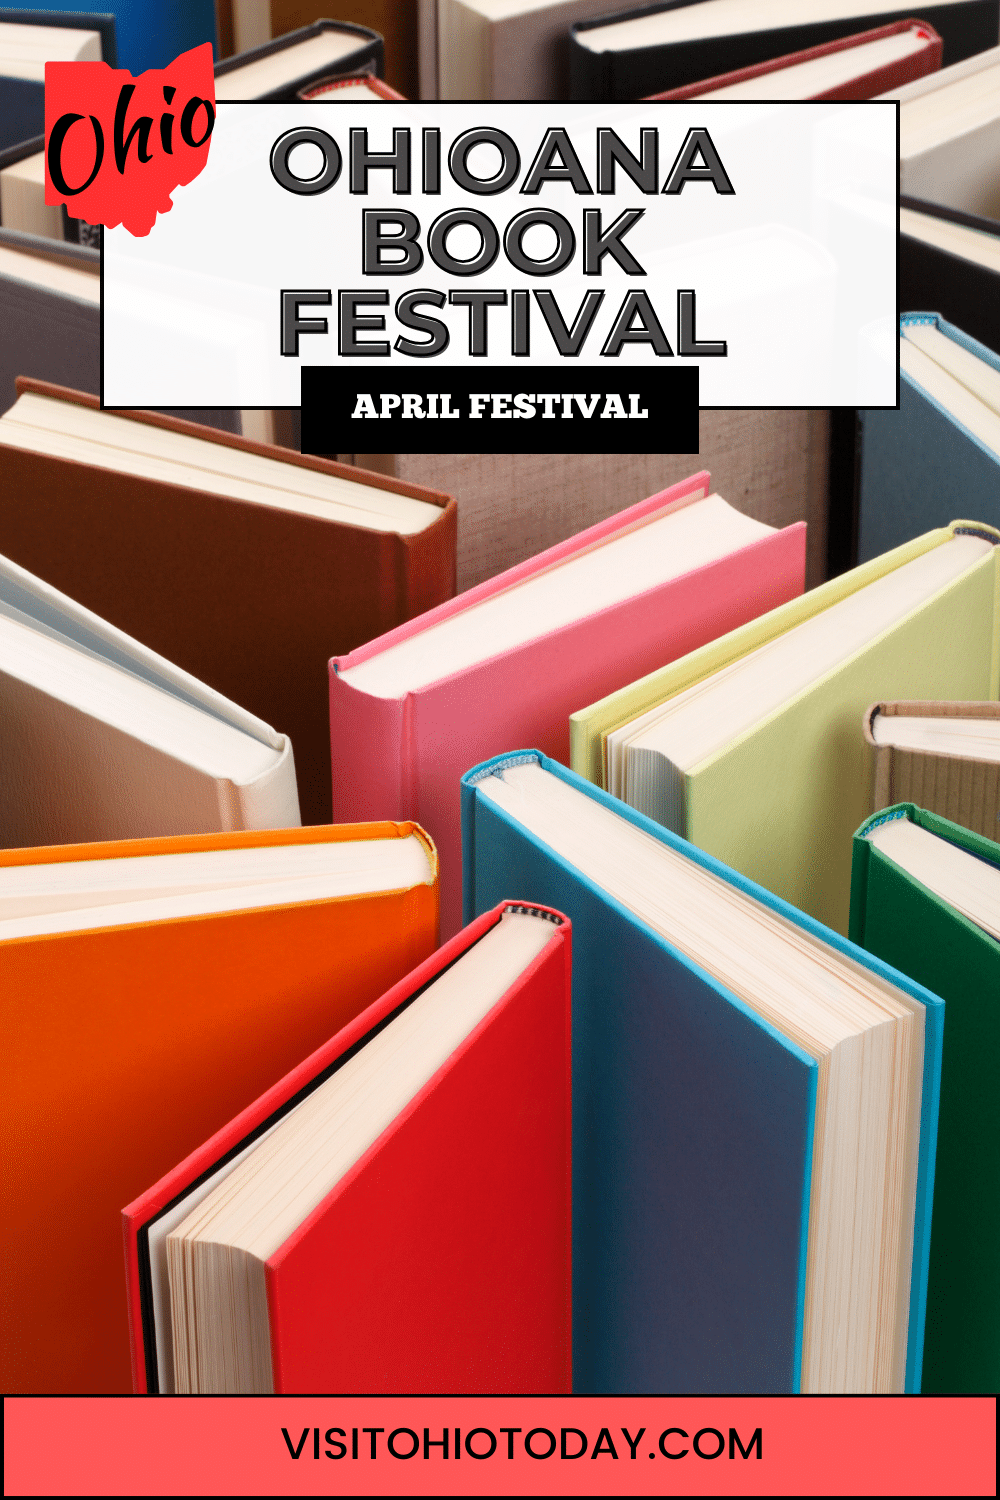 The Ohioana Book Festival is scheduled for mid-Apri at Columbus Metropolitan Library's main library, celebrating Ohio authors.